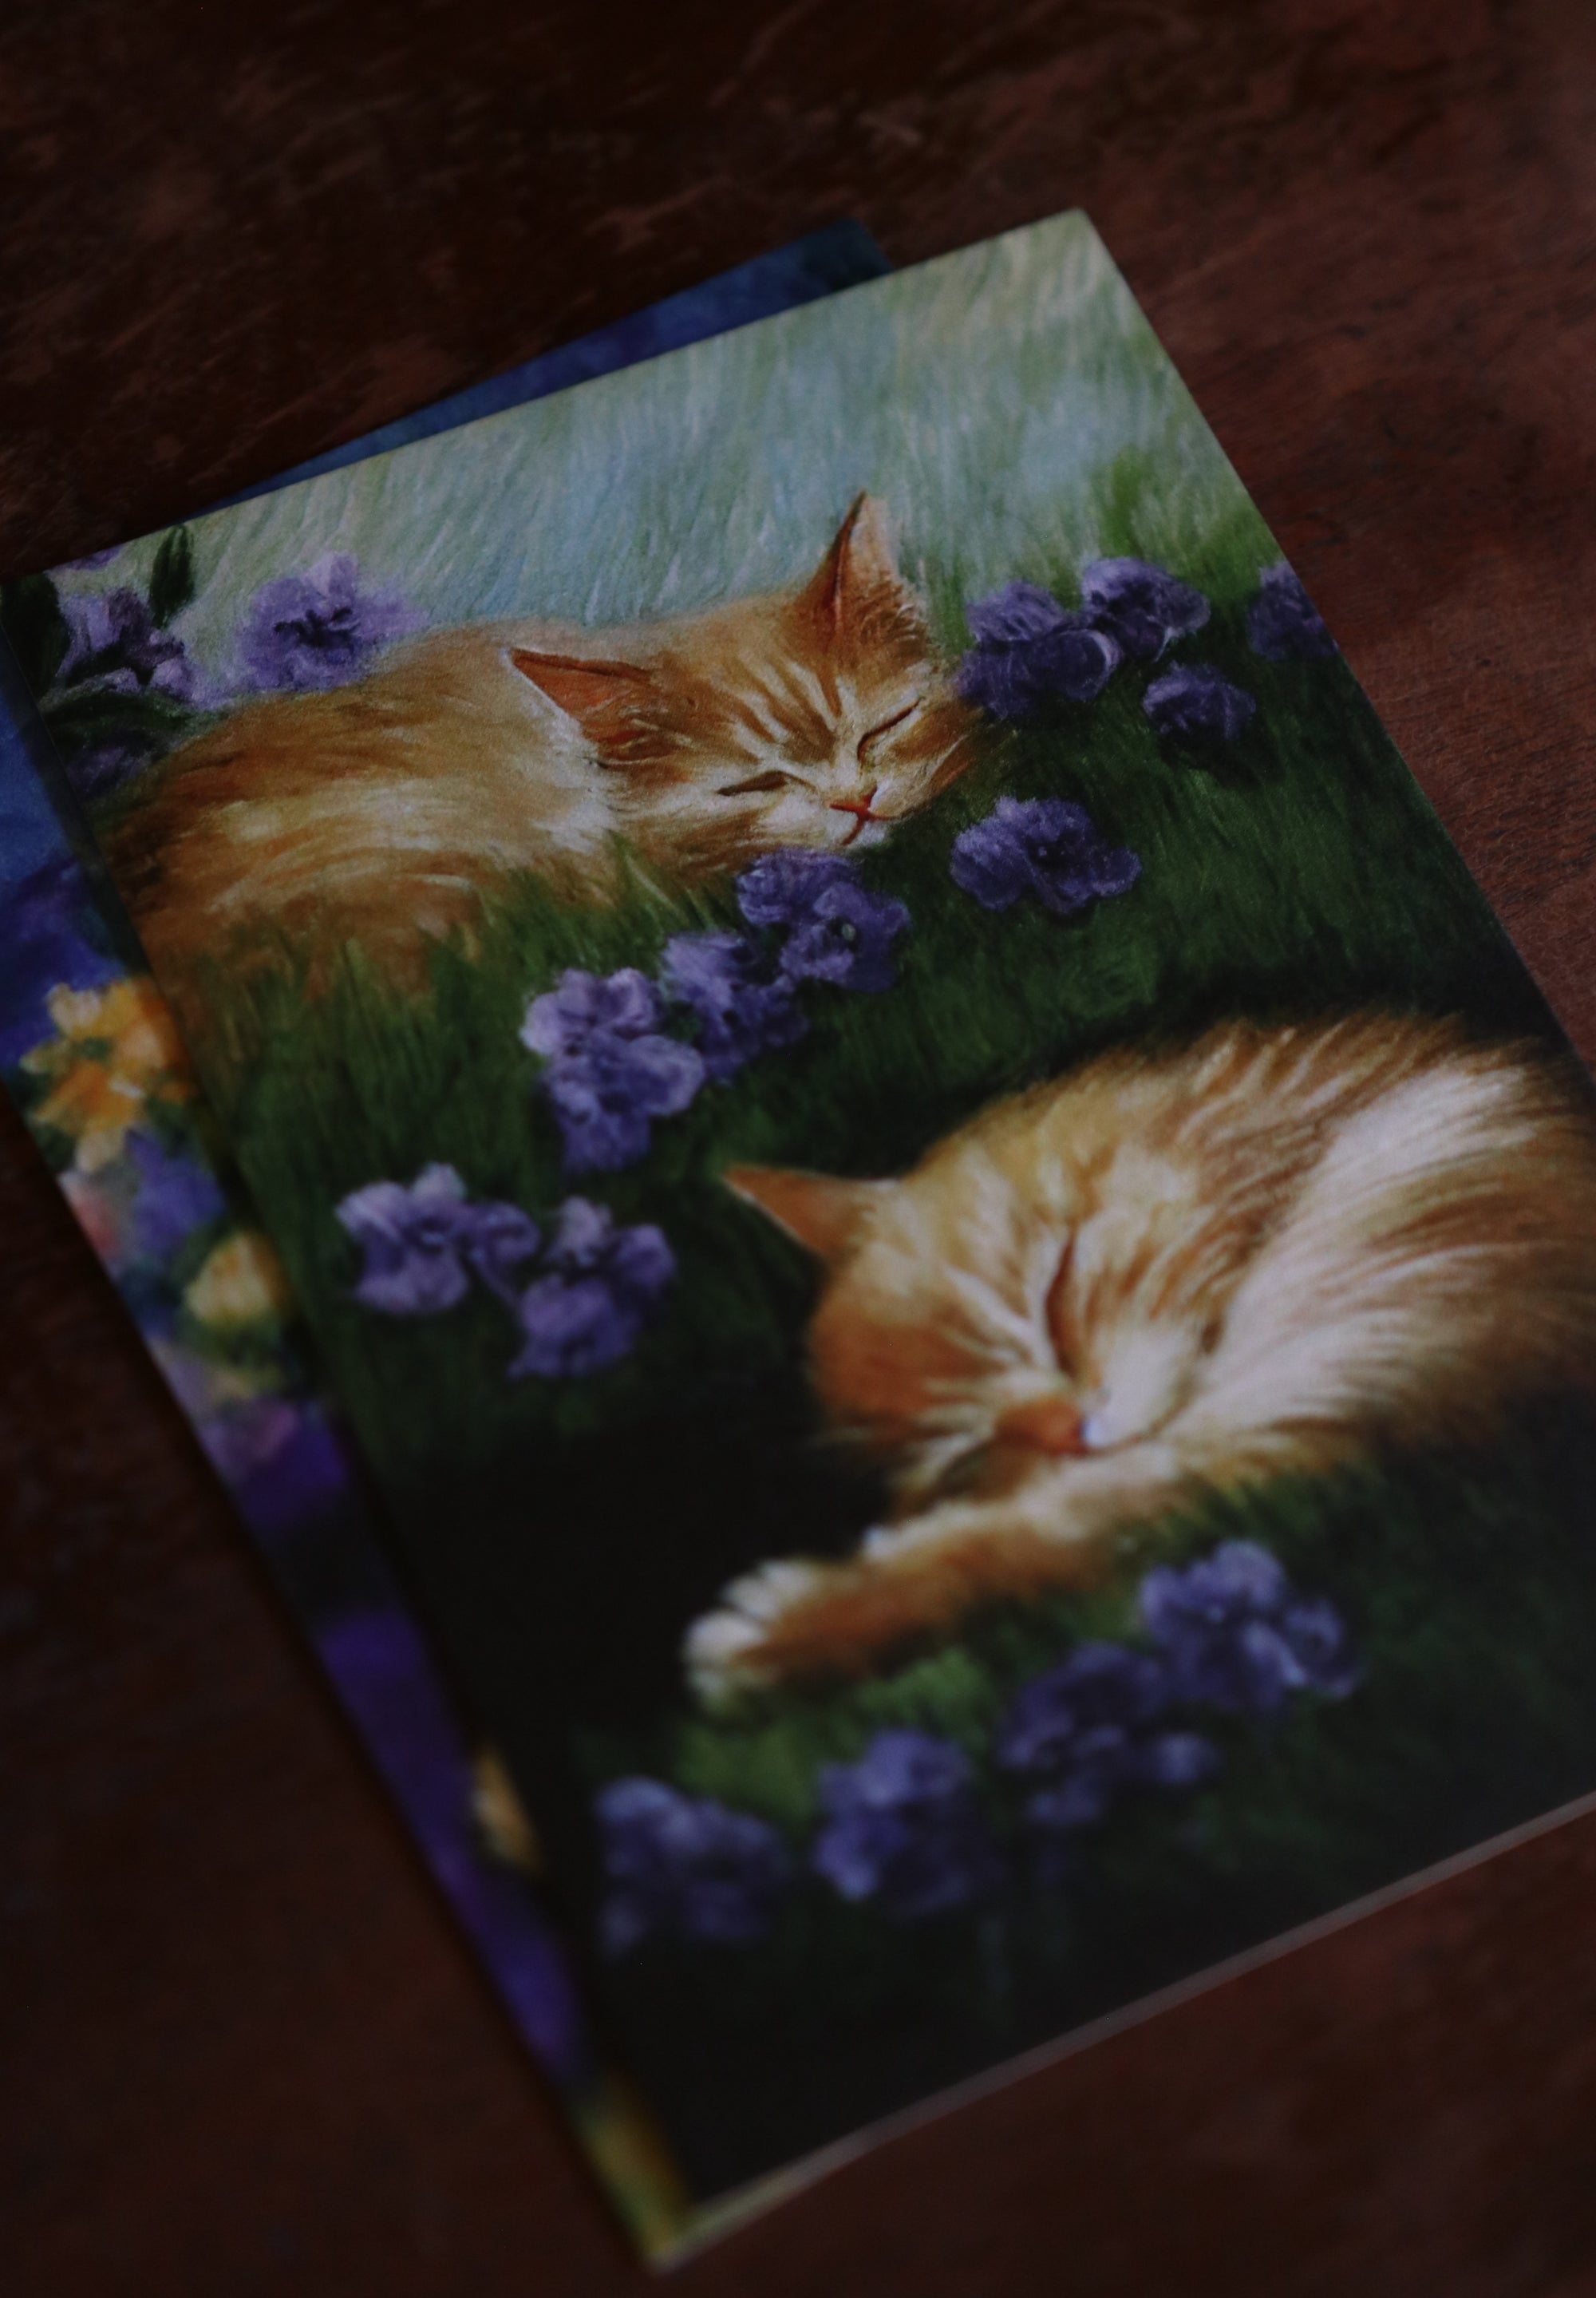 Cats, Kitties, Meows - Notecard / Stationery / Art - 10 Count.